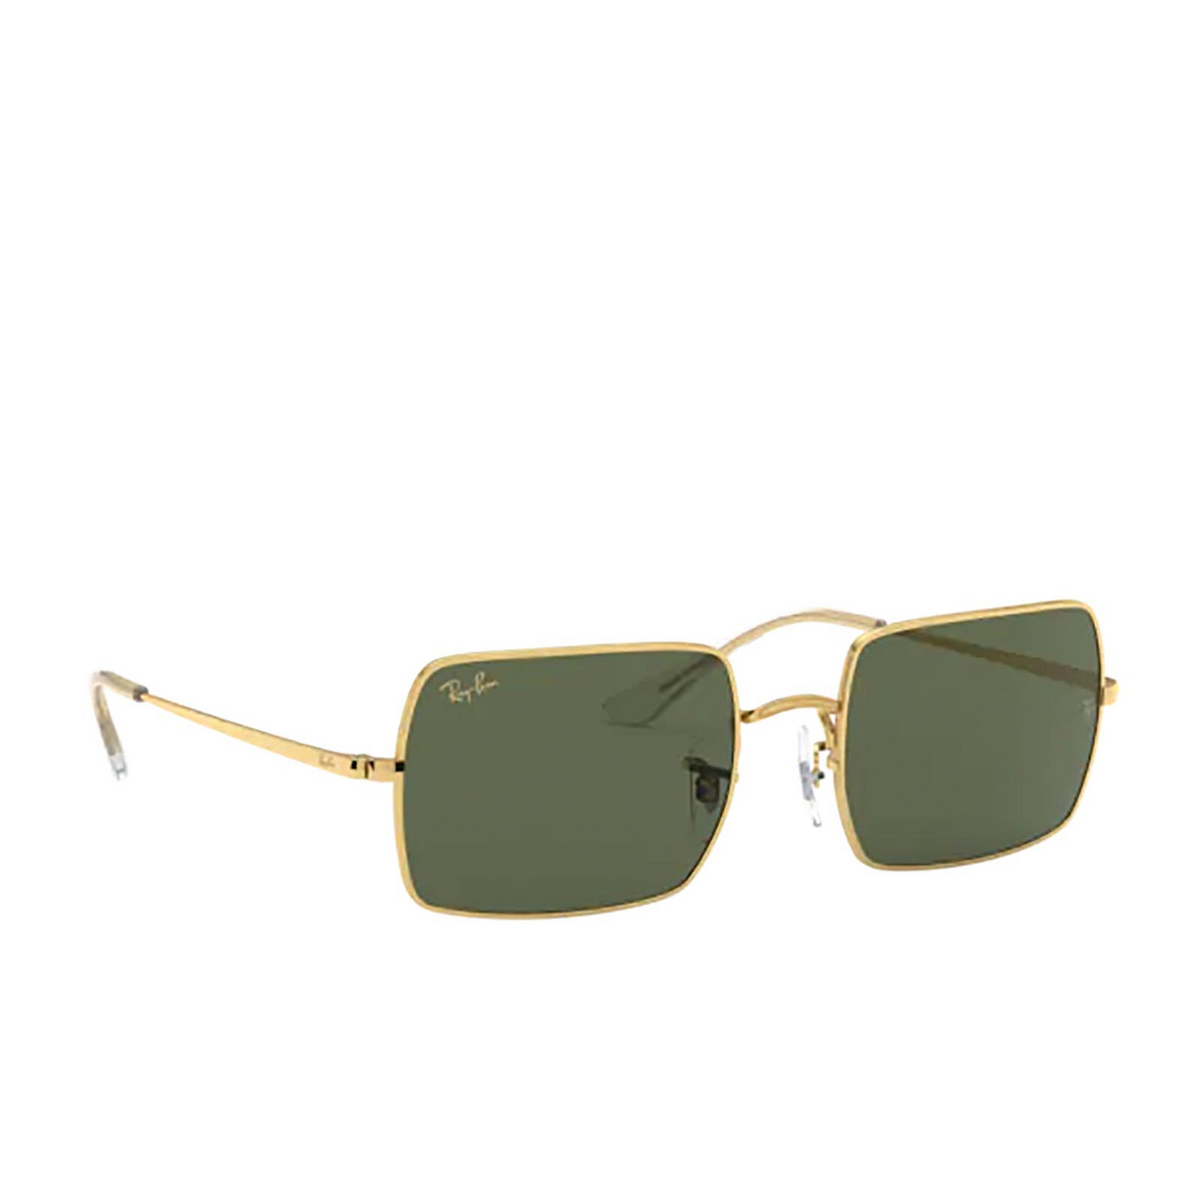 Ray-Ban RECTANGLE Sunglasses 919631 LEGEND GOLD - three-quarters view